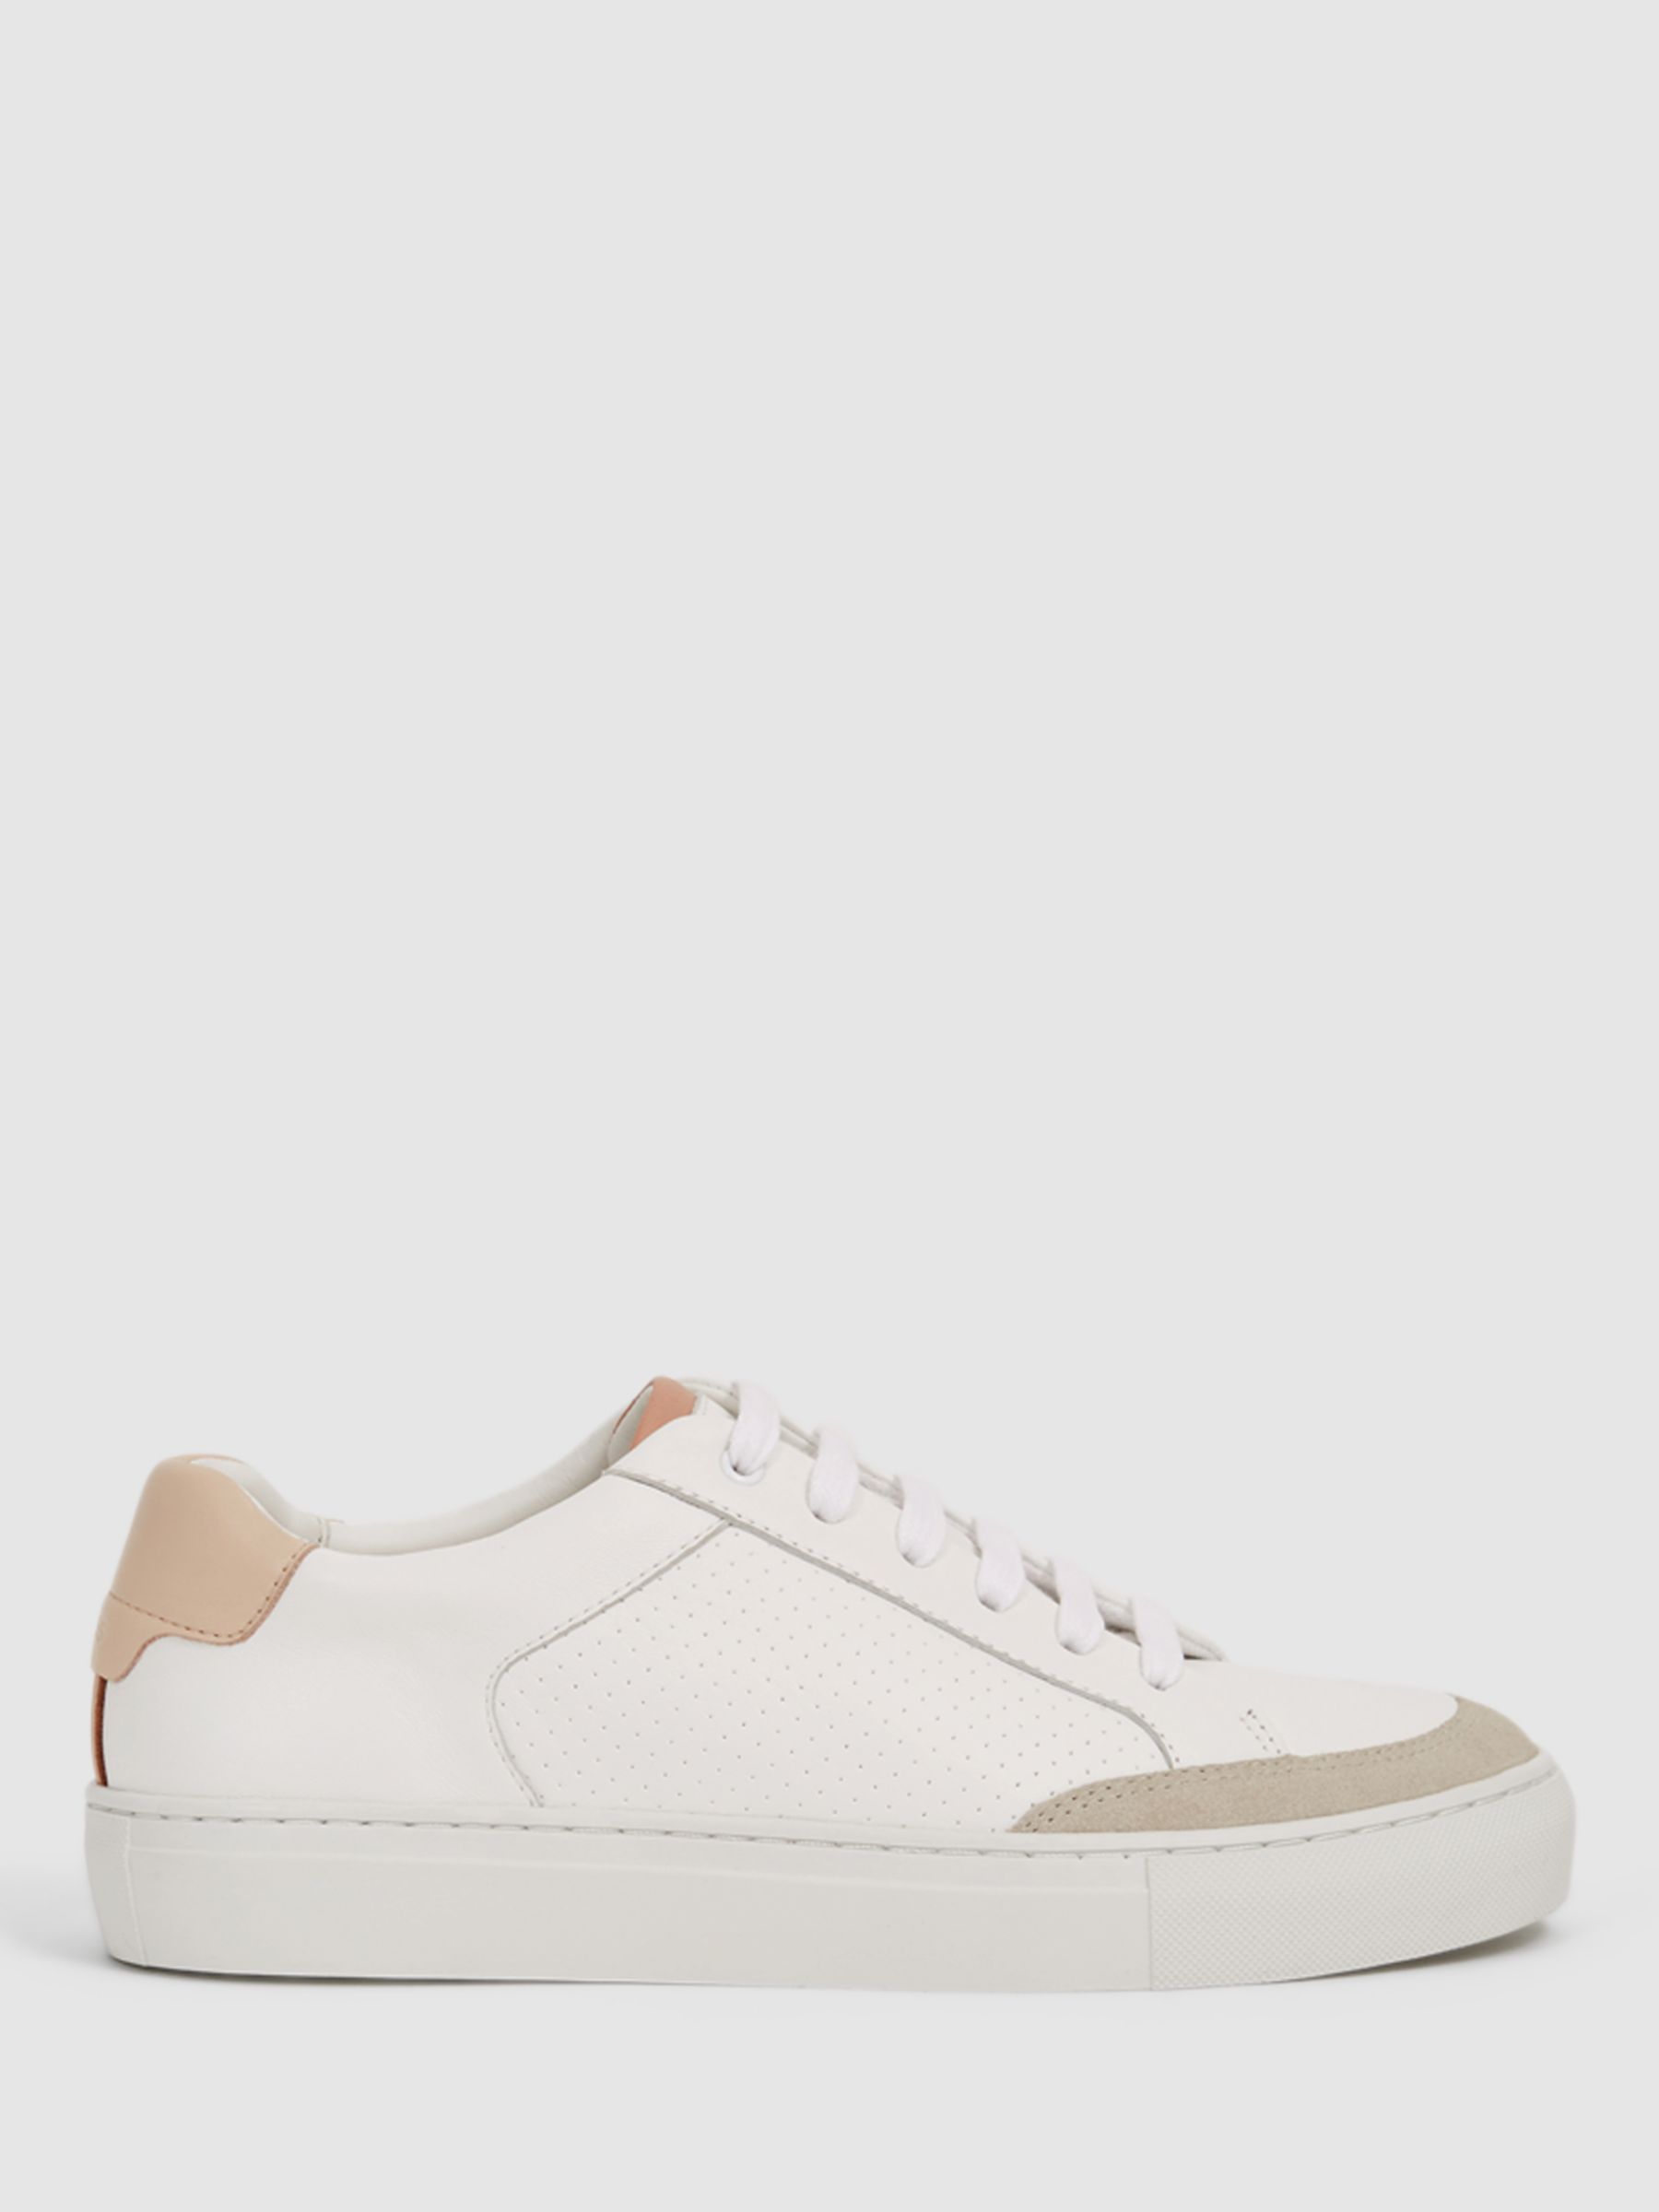 Reiss Ashley Leather and Suede Low Top Trainers, White/Mineral at John ...